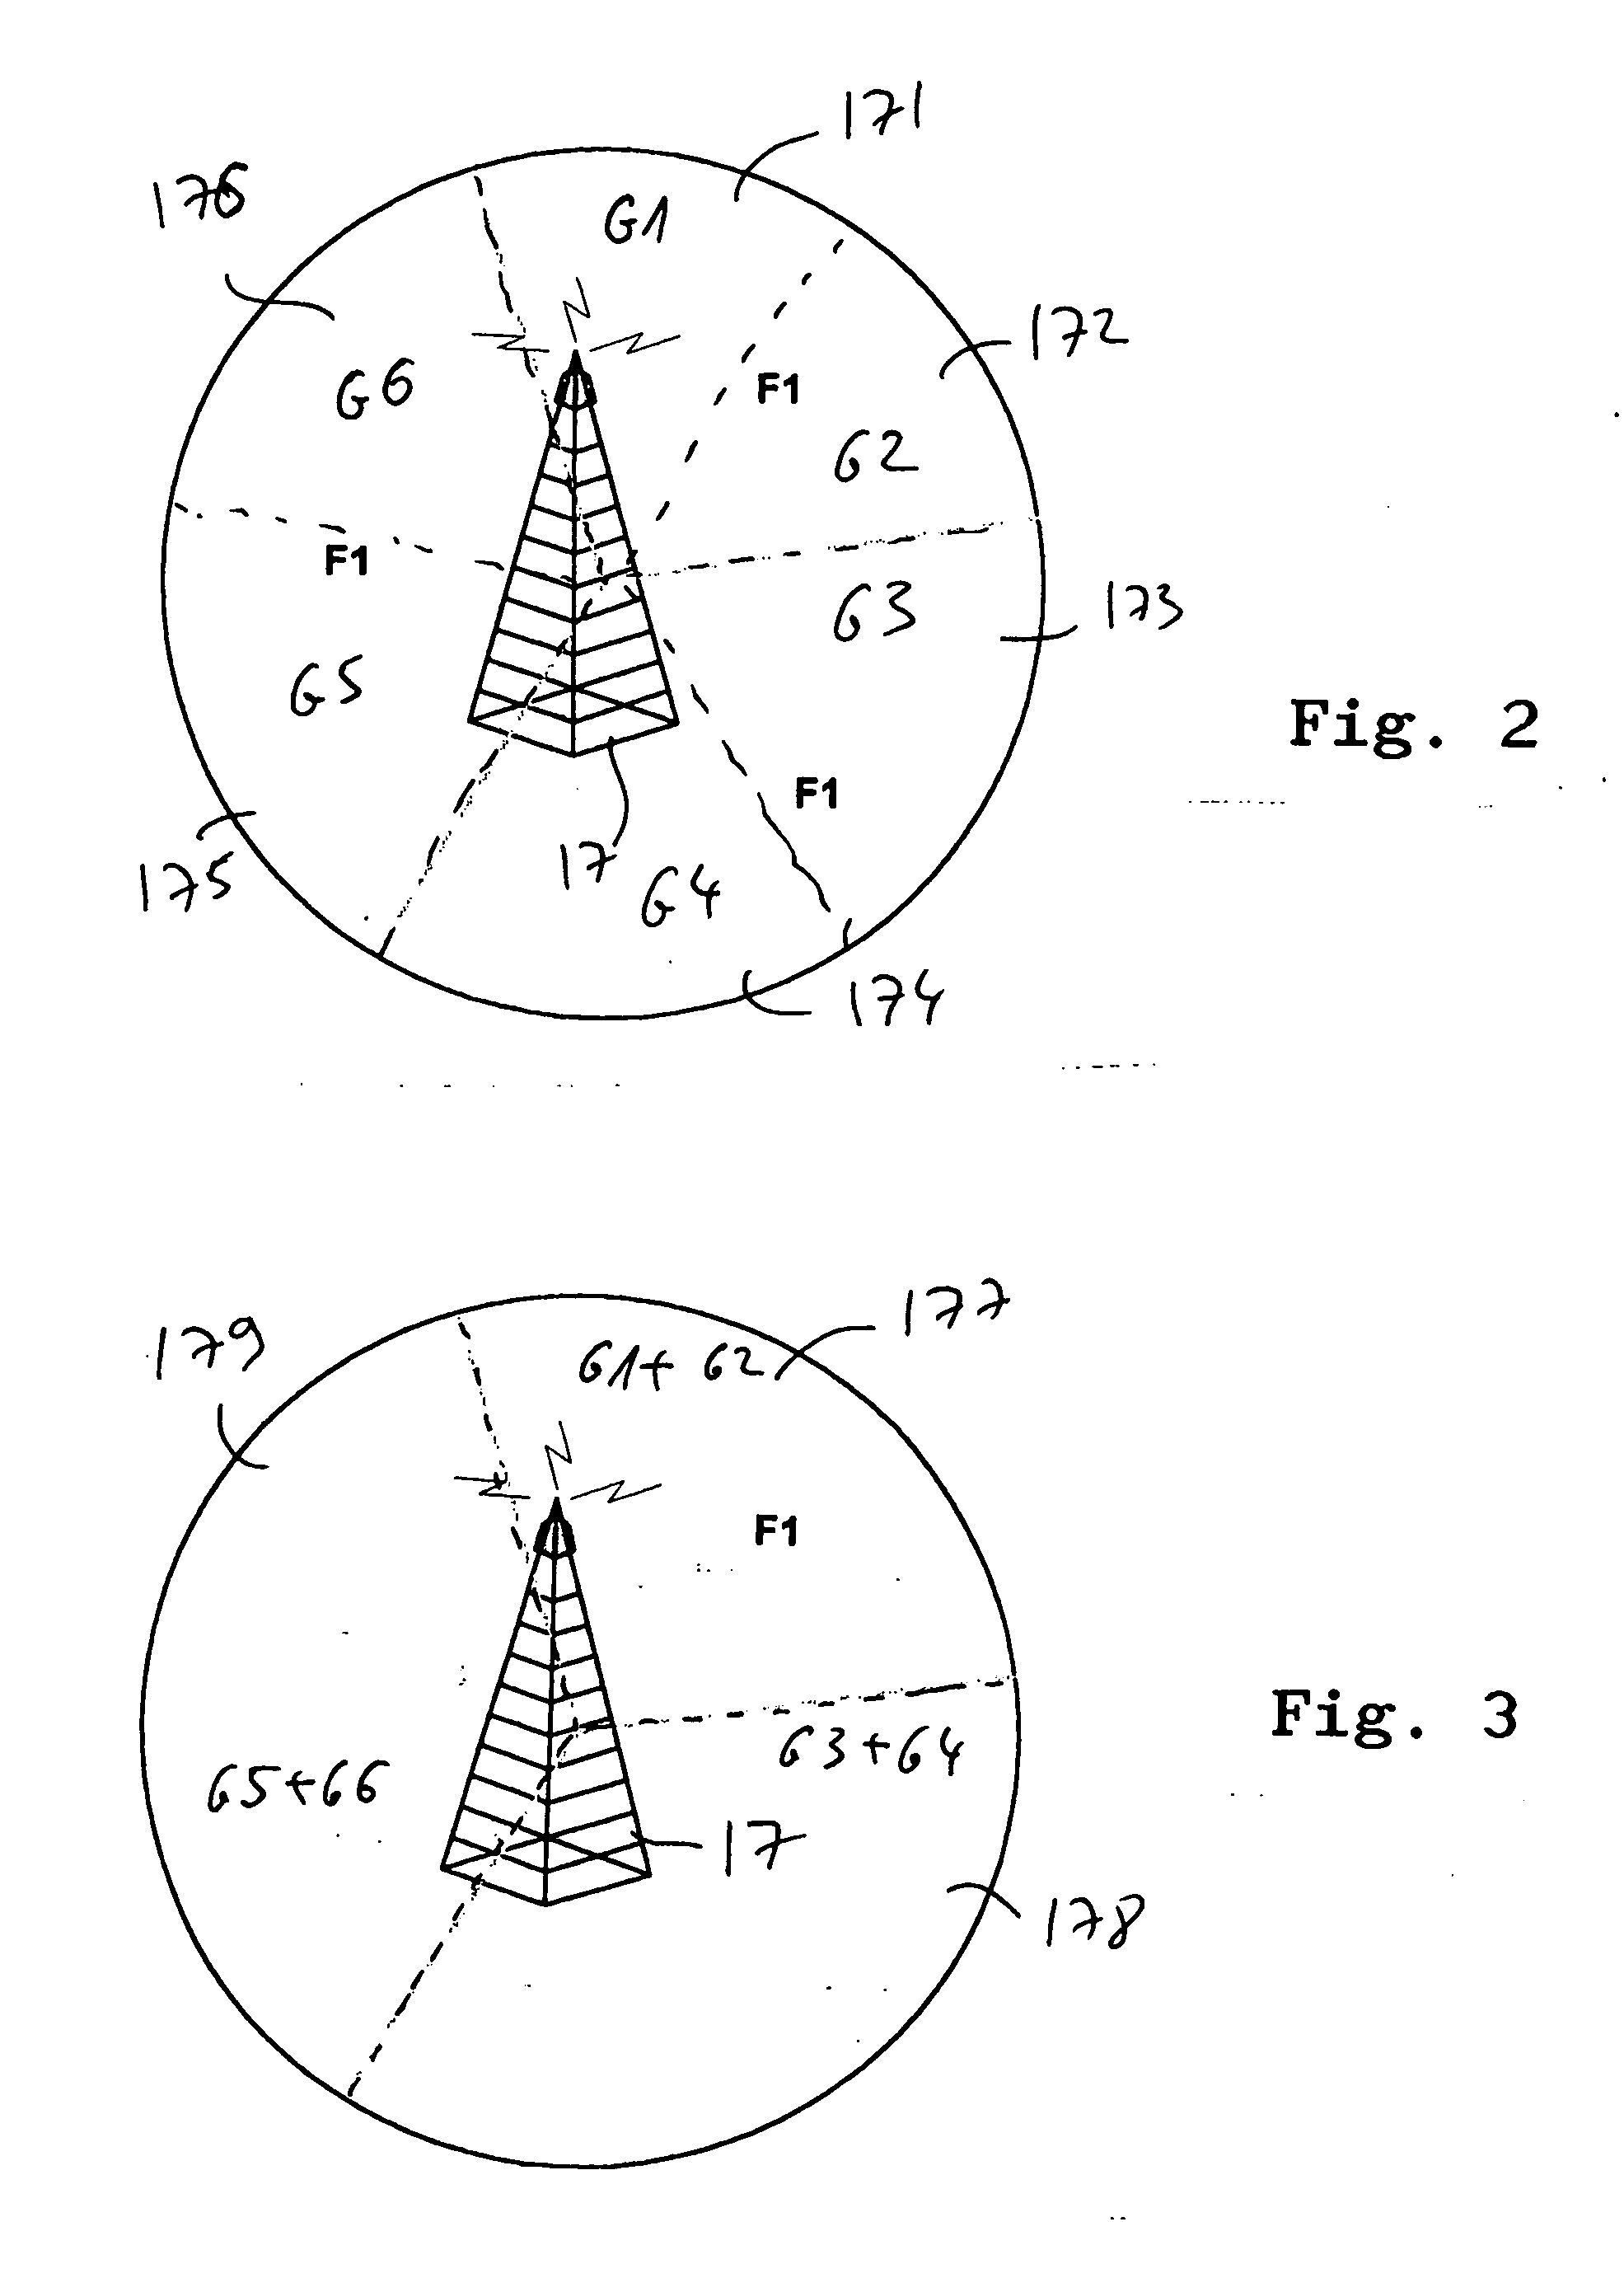 Cellular network system and method